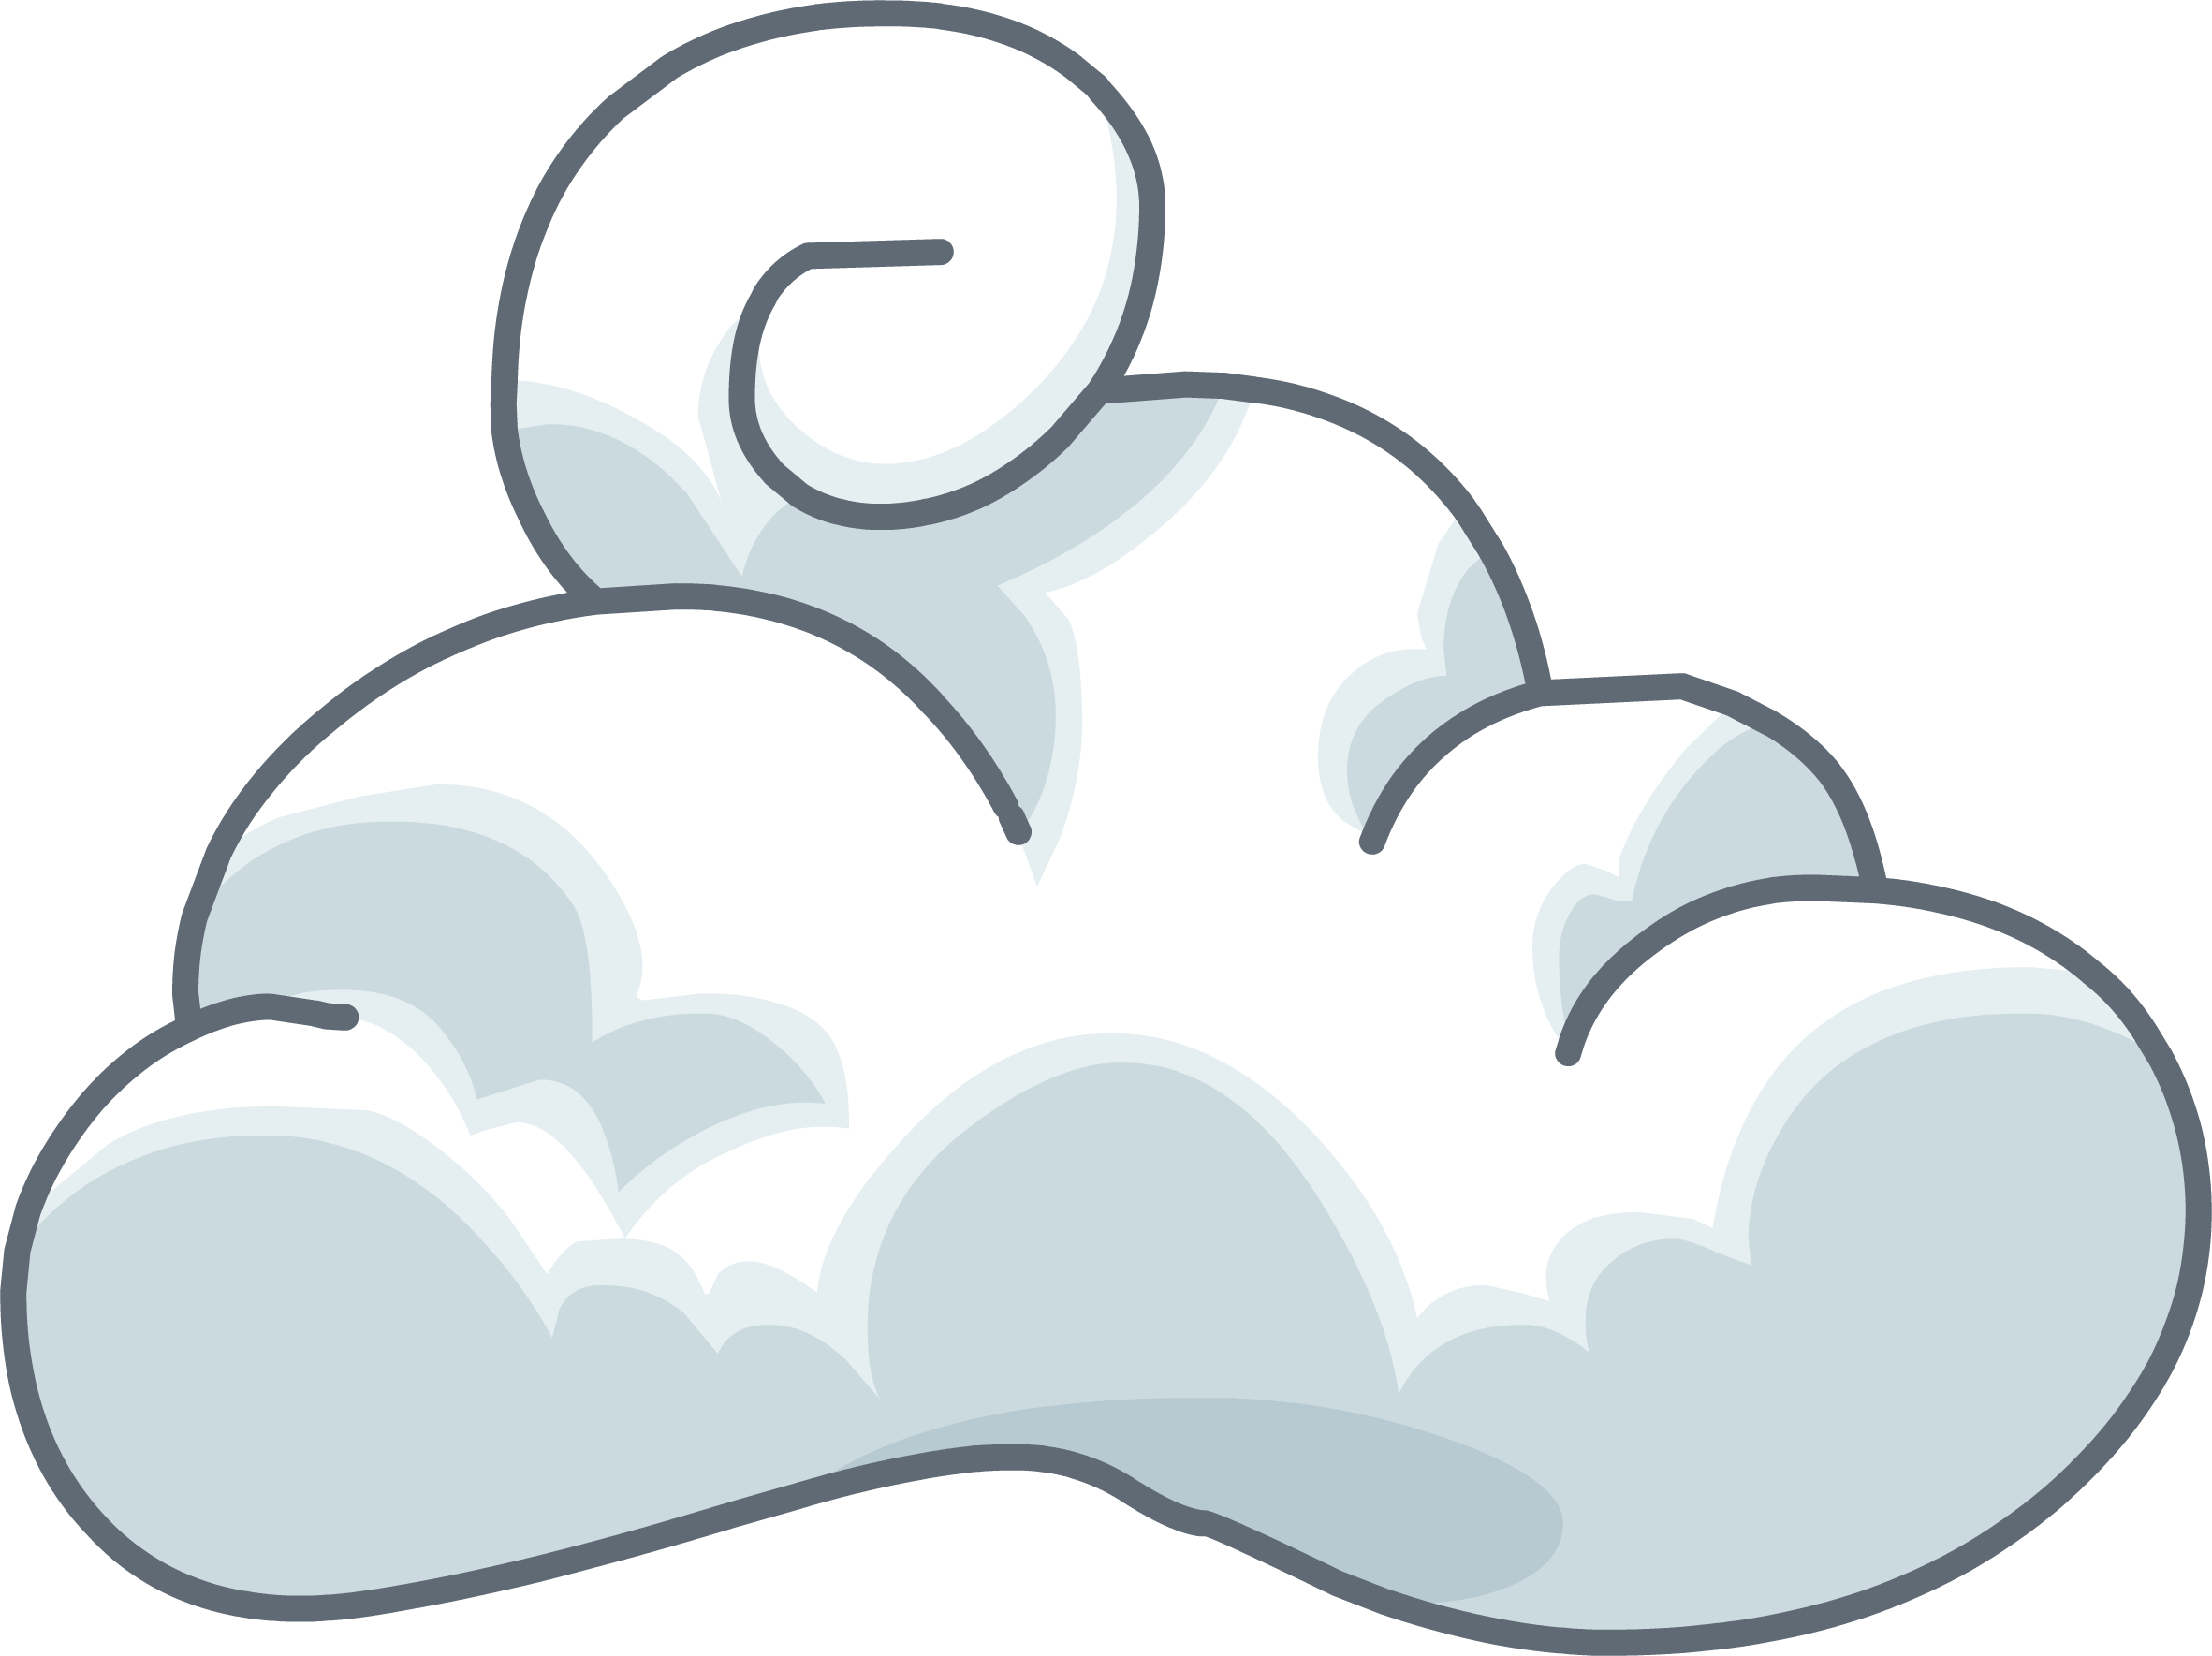 Image wispy clouds sprite. Legal clipart reprehensible